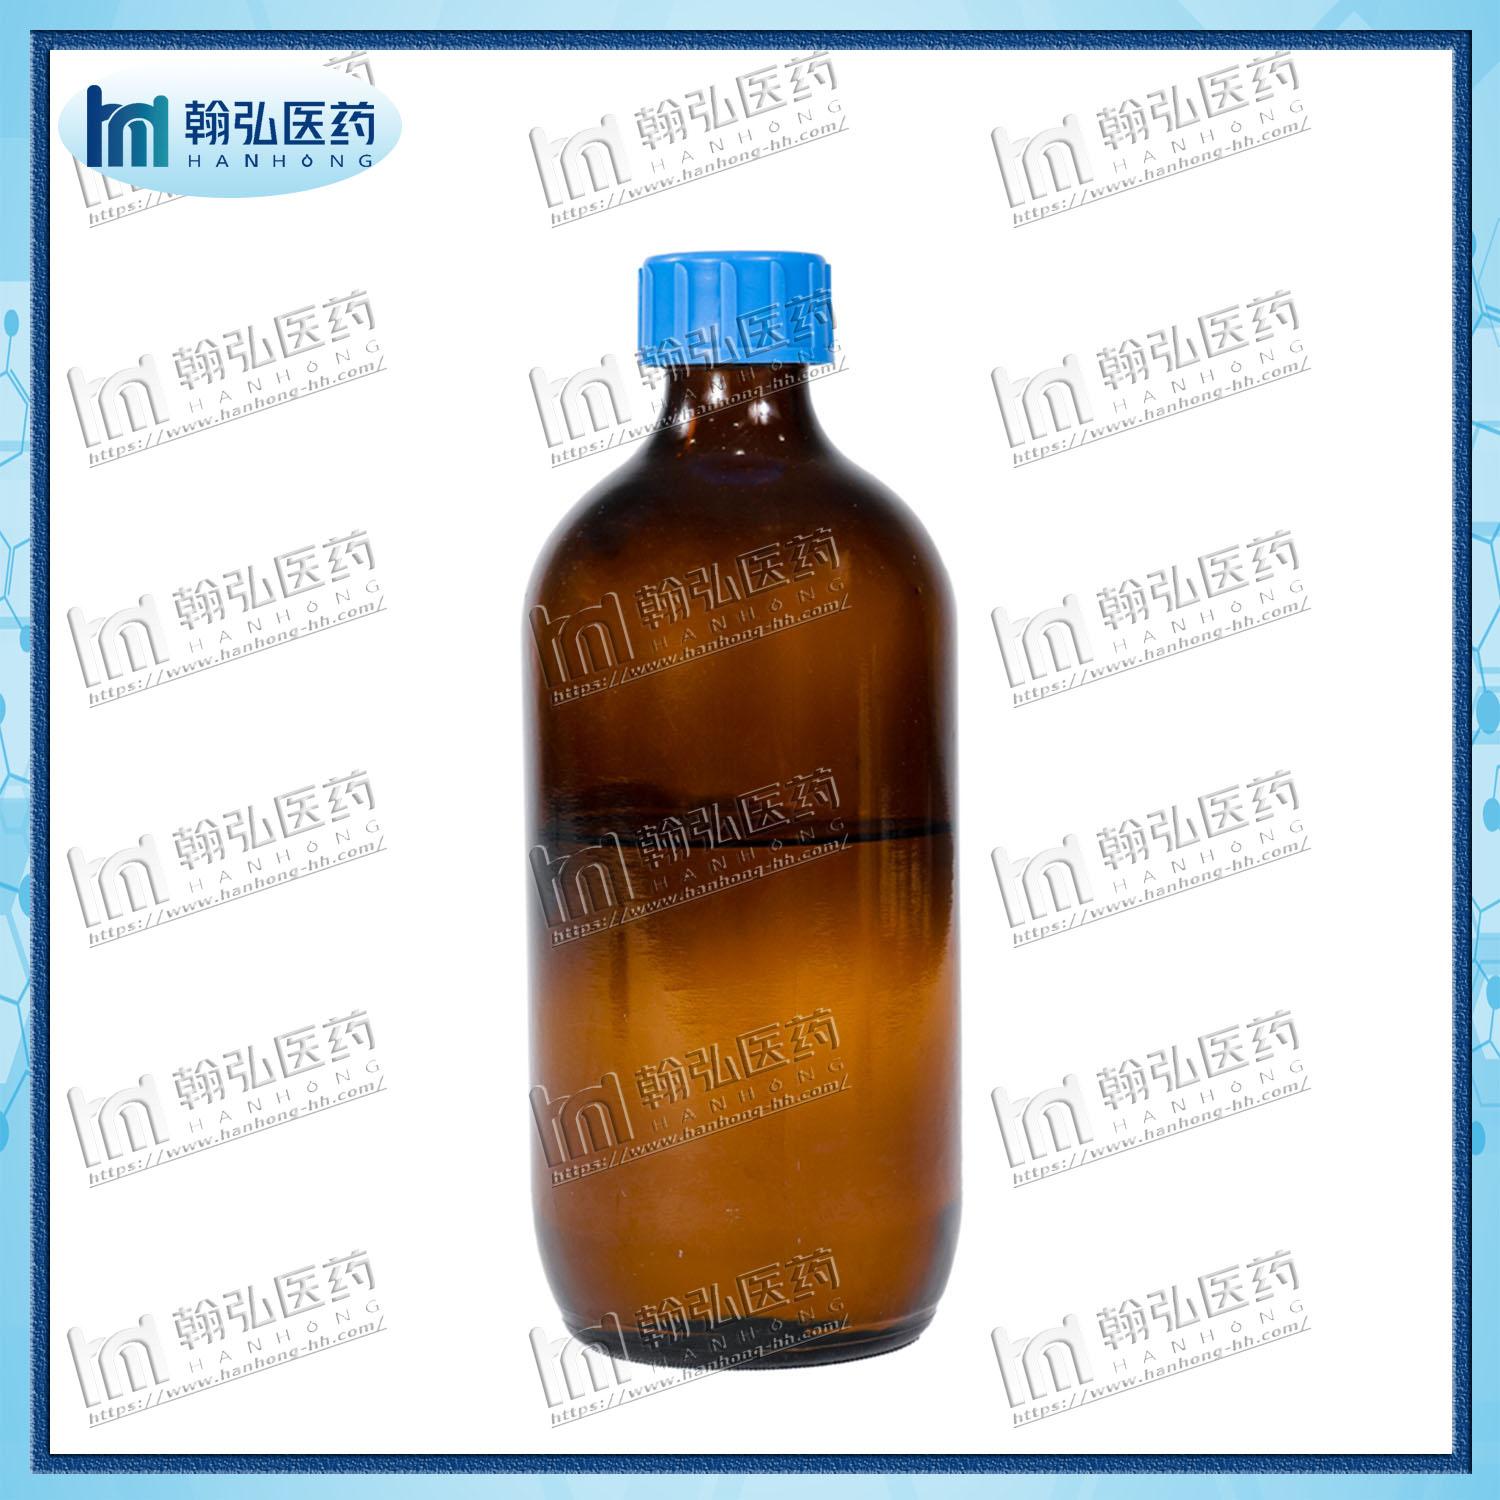 Hot Sale High Purity 2-Bromo-1-Phenylpropane CAS 2114-39-8/877-37-2/236117-38-7/1451-82-7 in Stock (WhatsApp/WeChat: +8615927457486 Wickr: Ccassie